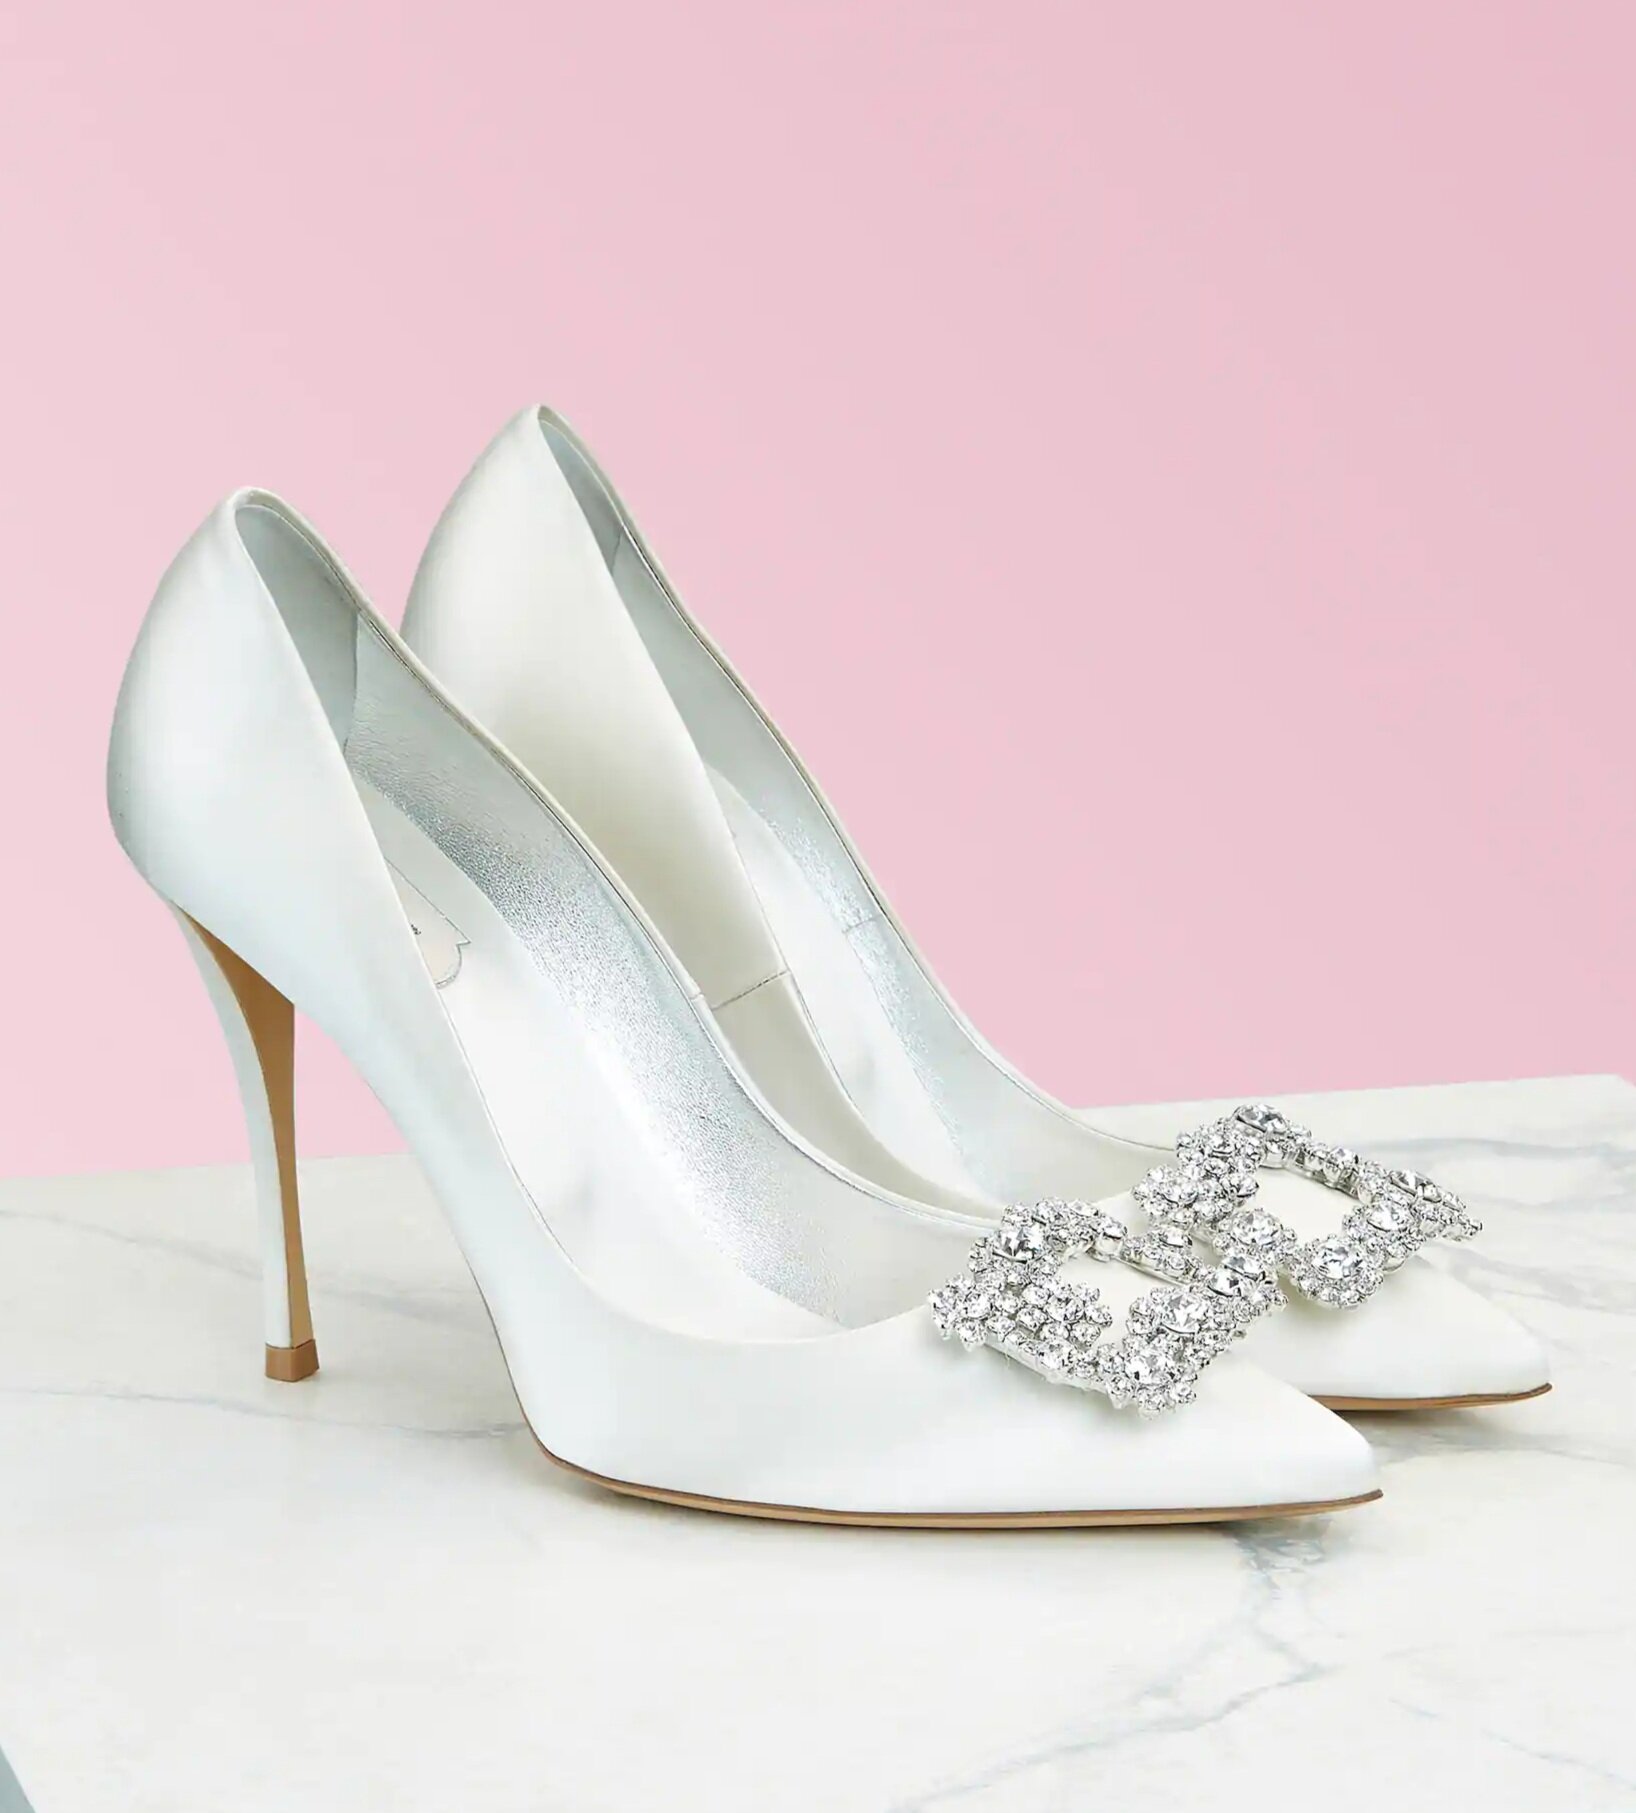 30 Christian Louboutin Shoes You'll Love Almost as Much as Your Husband   Christian louboutin wedding shoes, Christian louboutin shoes, Manolo  blahnik heels